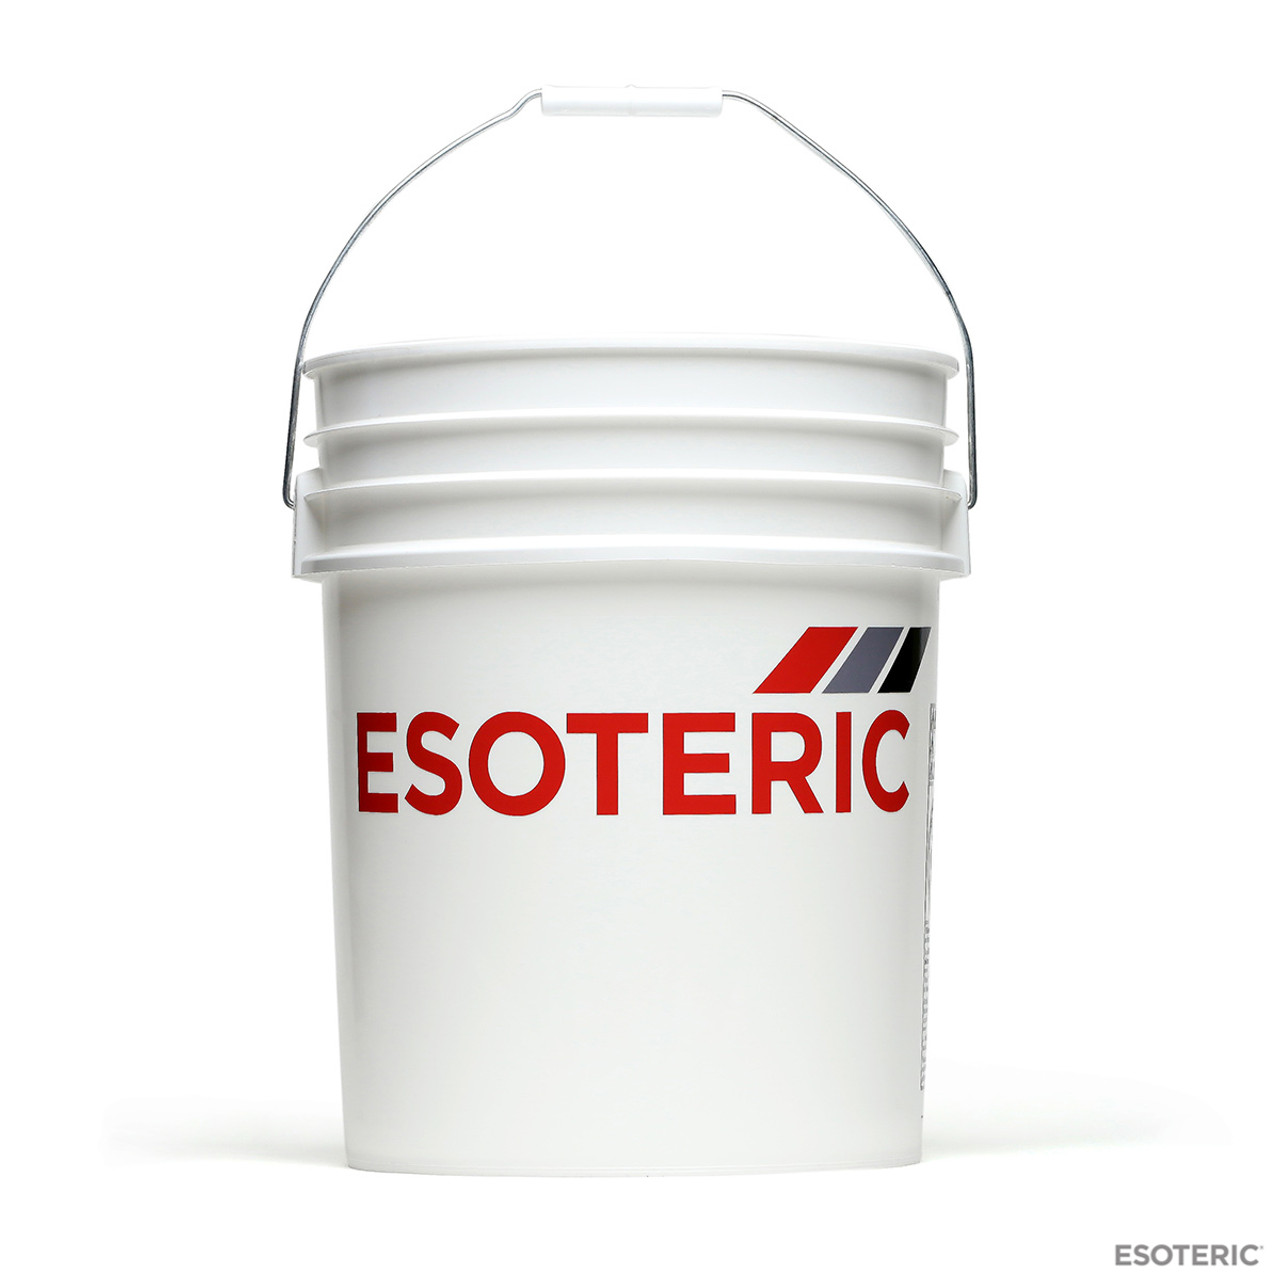 Esoteric Essential Wheel Care Kit - ESOTERIC Car Care